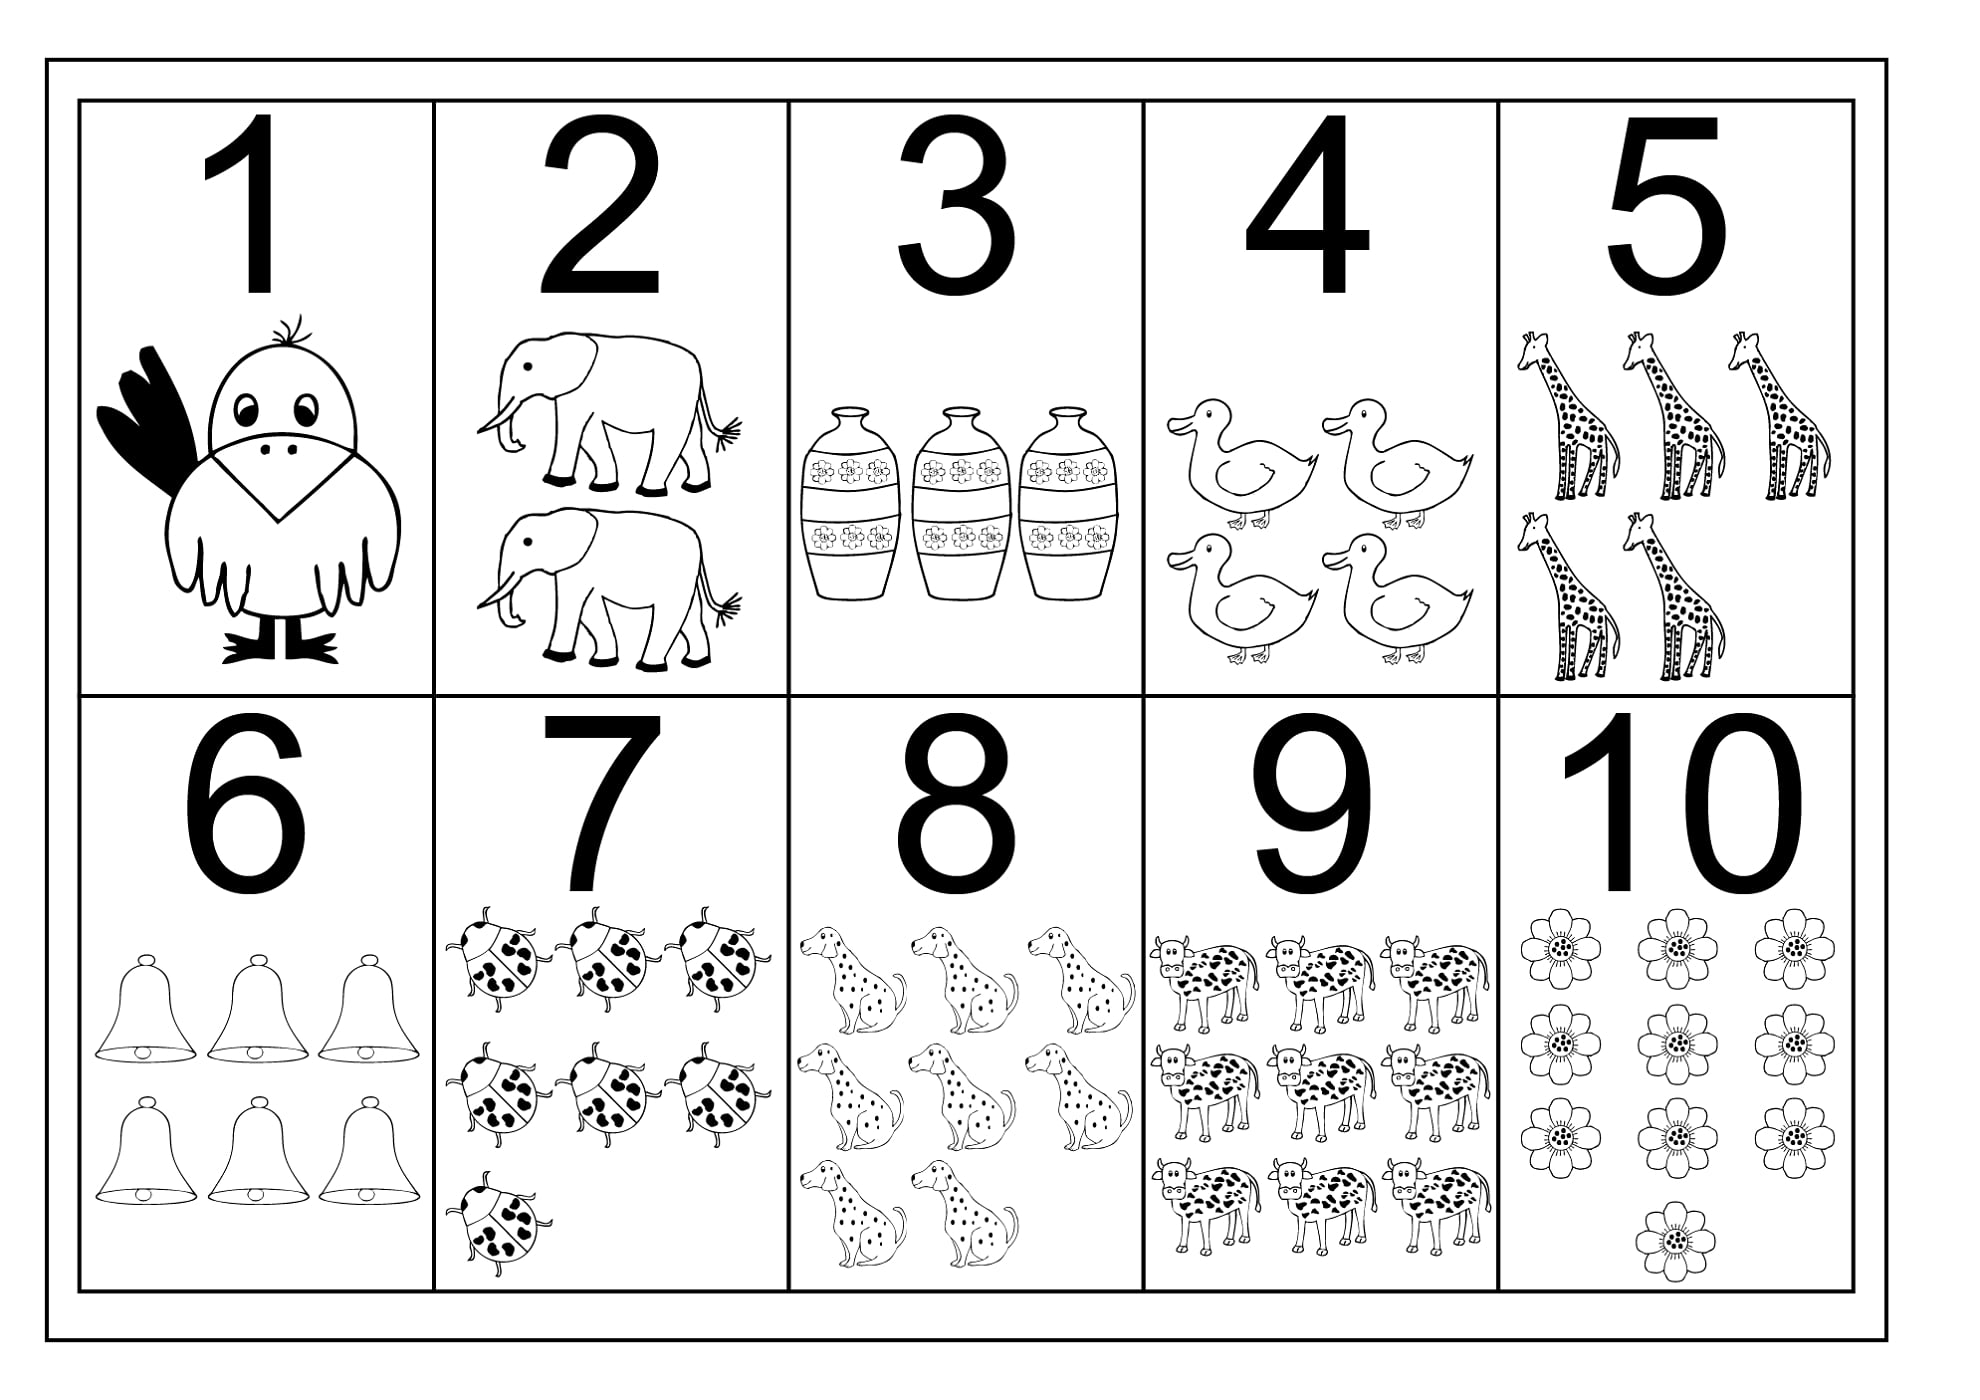 Printable Counting By 10s Chart_21592